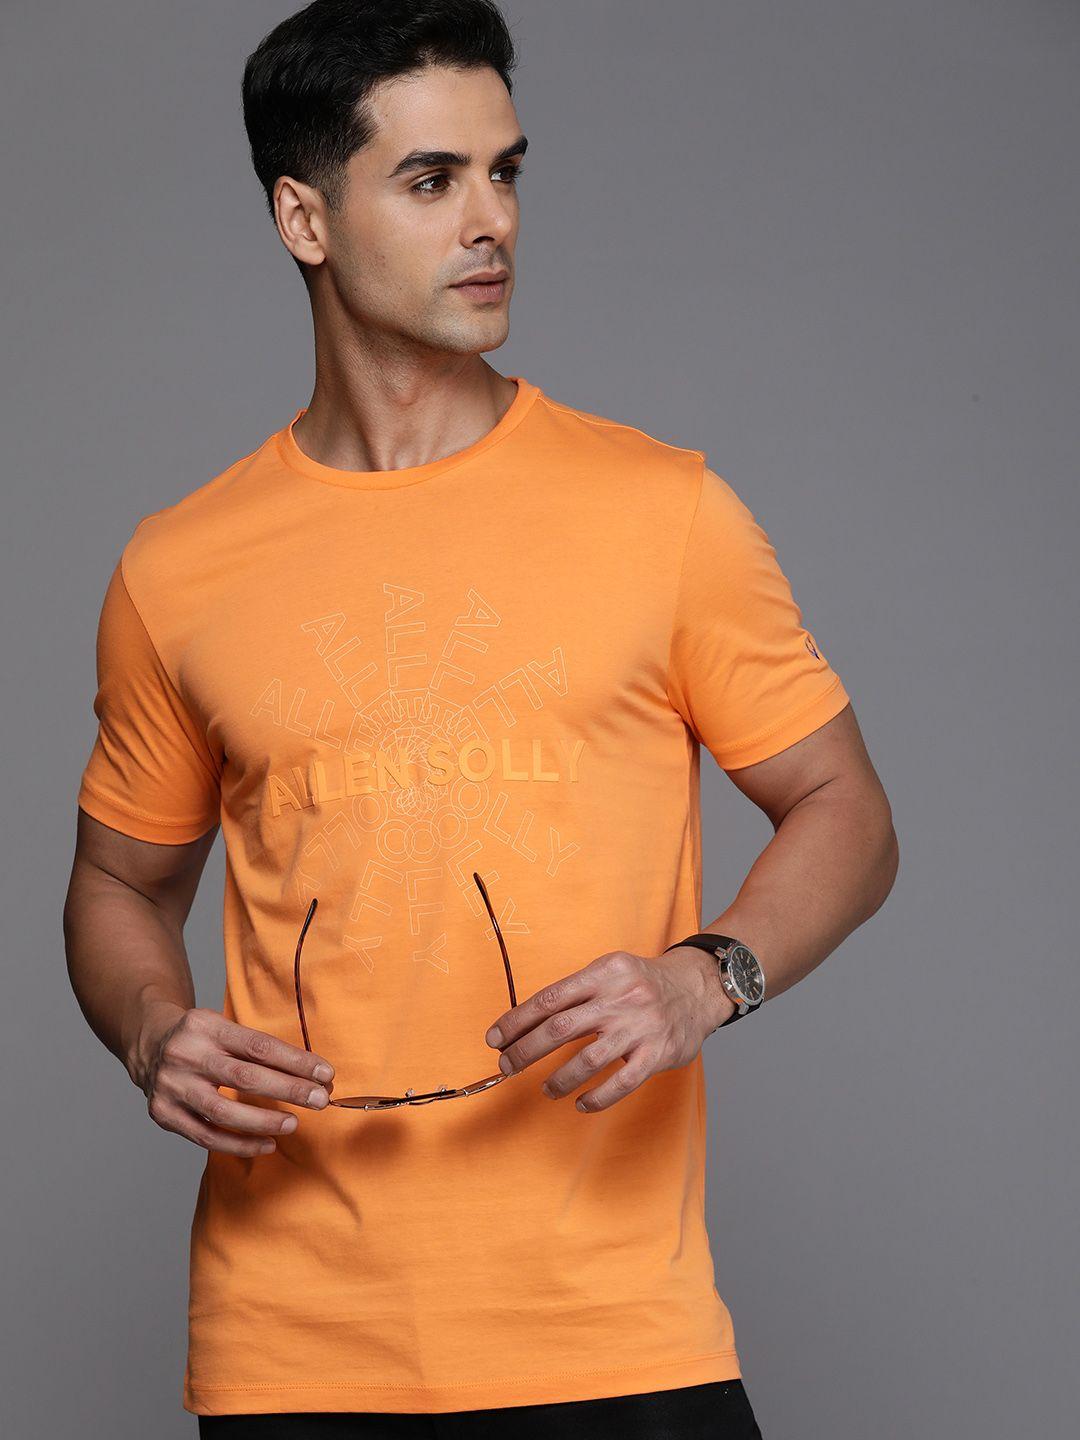 allen solly pure cotton brand logo printed slim fit casual t-shirt